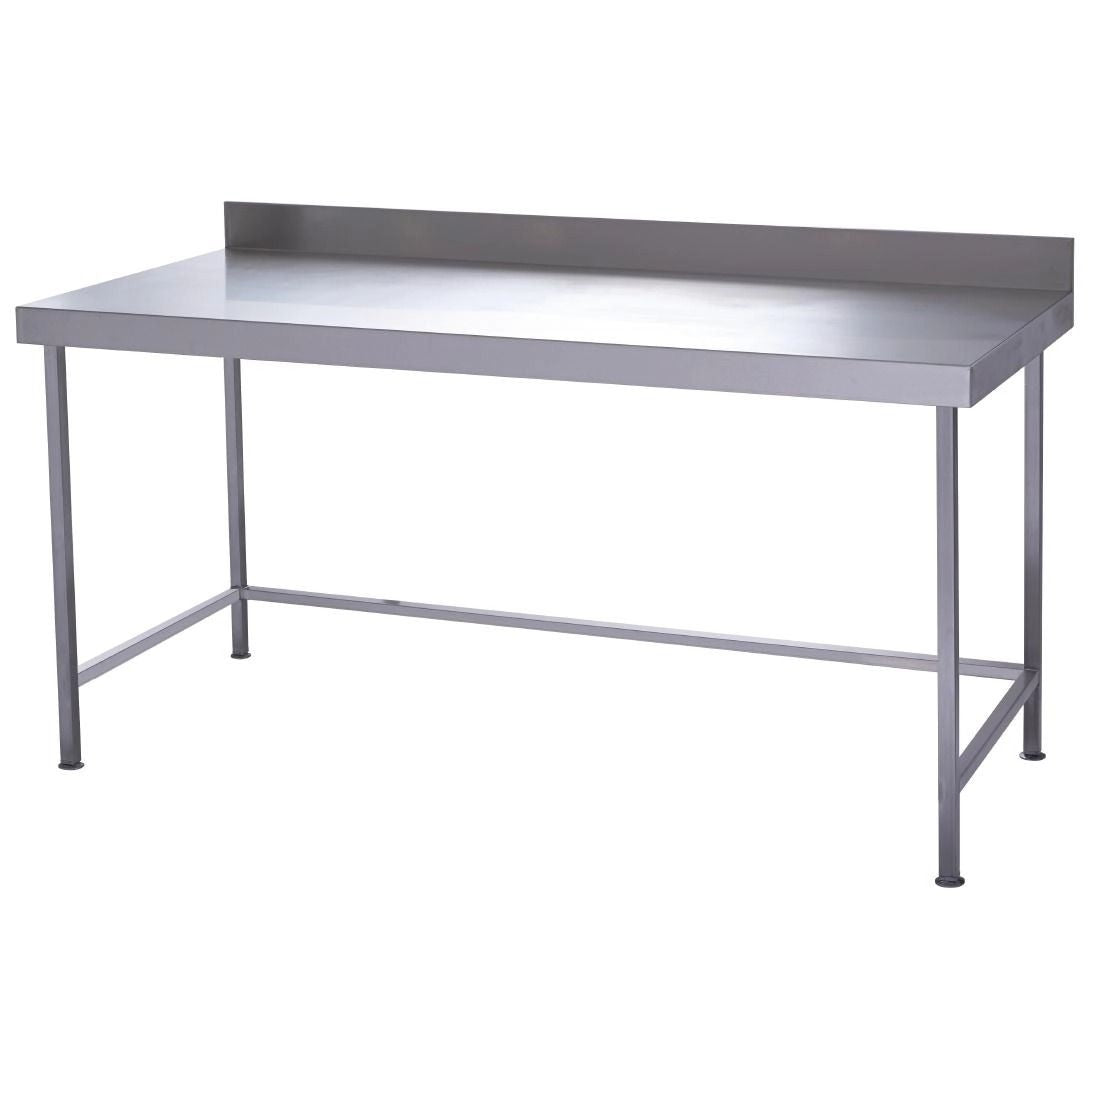 Parry Fully Welded Stainless Steel Wall Table 1200x600mm - DC598